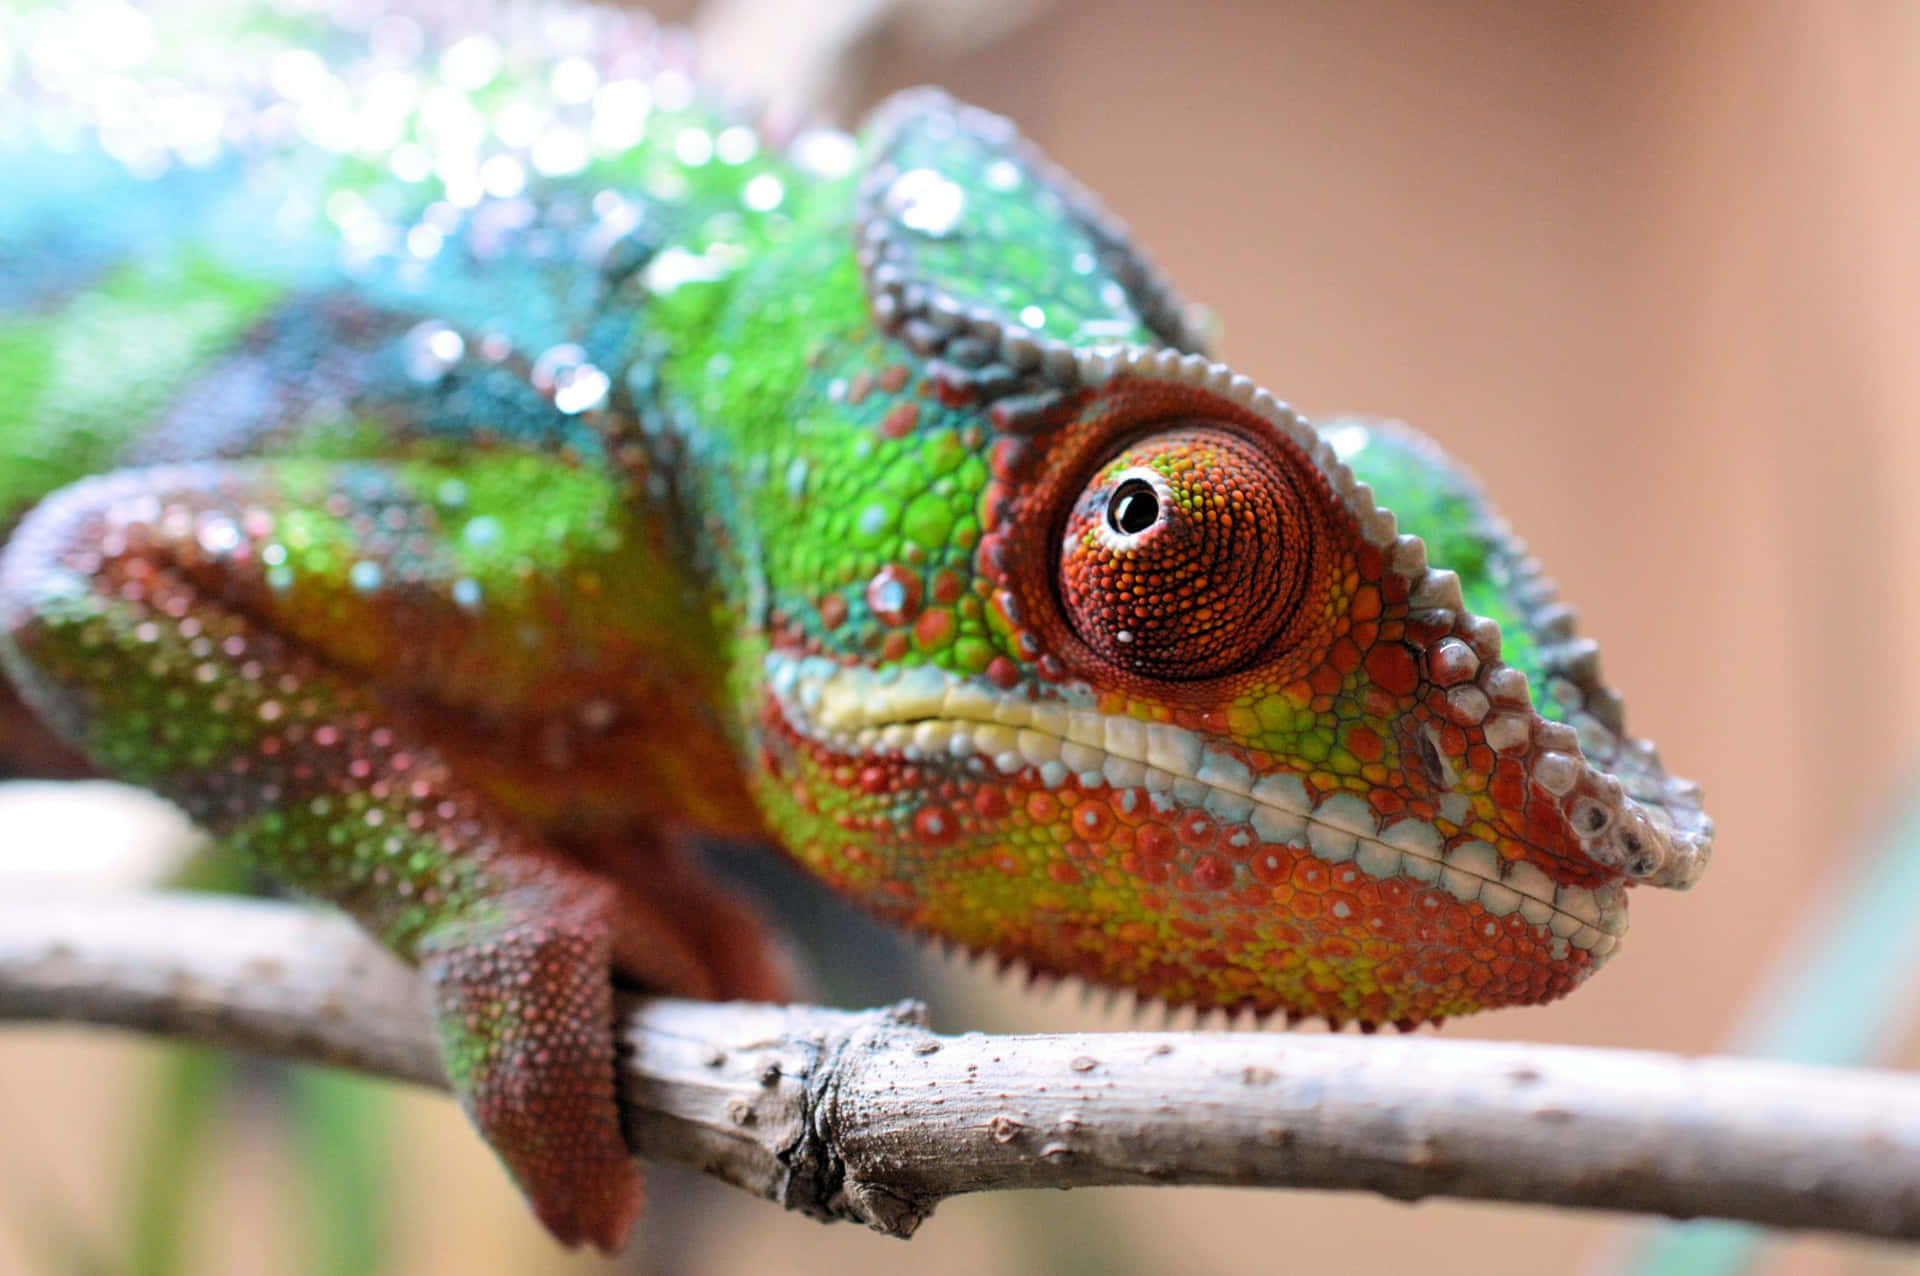 Green Chameleon With a Happy Expression